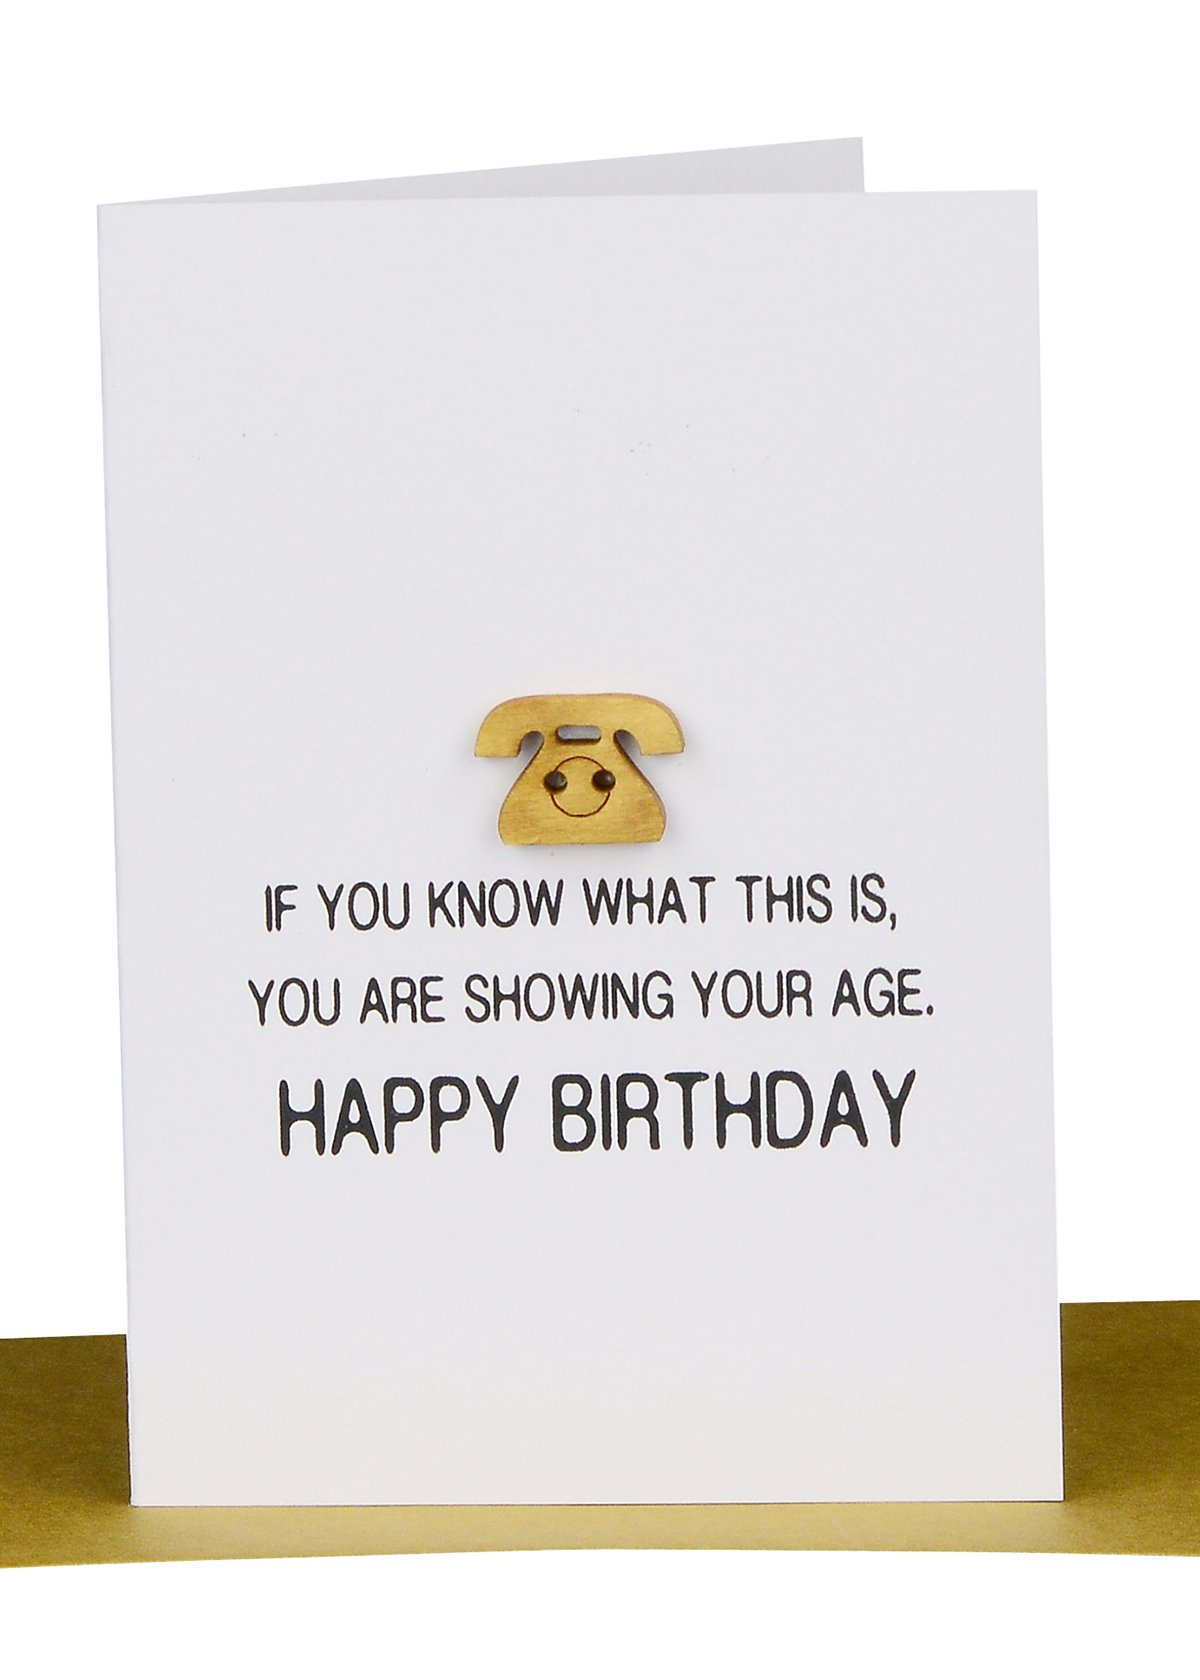 Australian Made Cards Small Birthday Gift Cards With Regard To Happy Birthday Gift Certificate